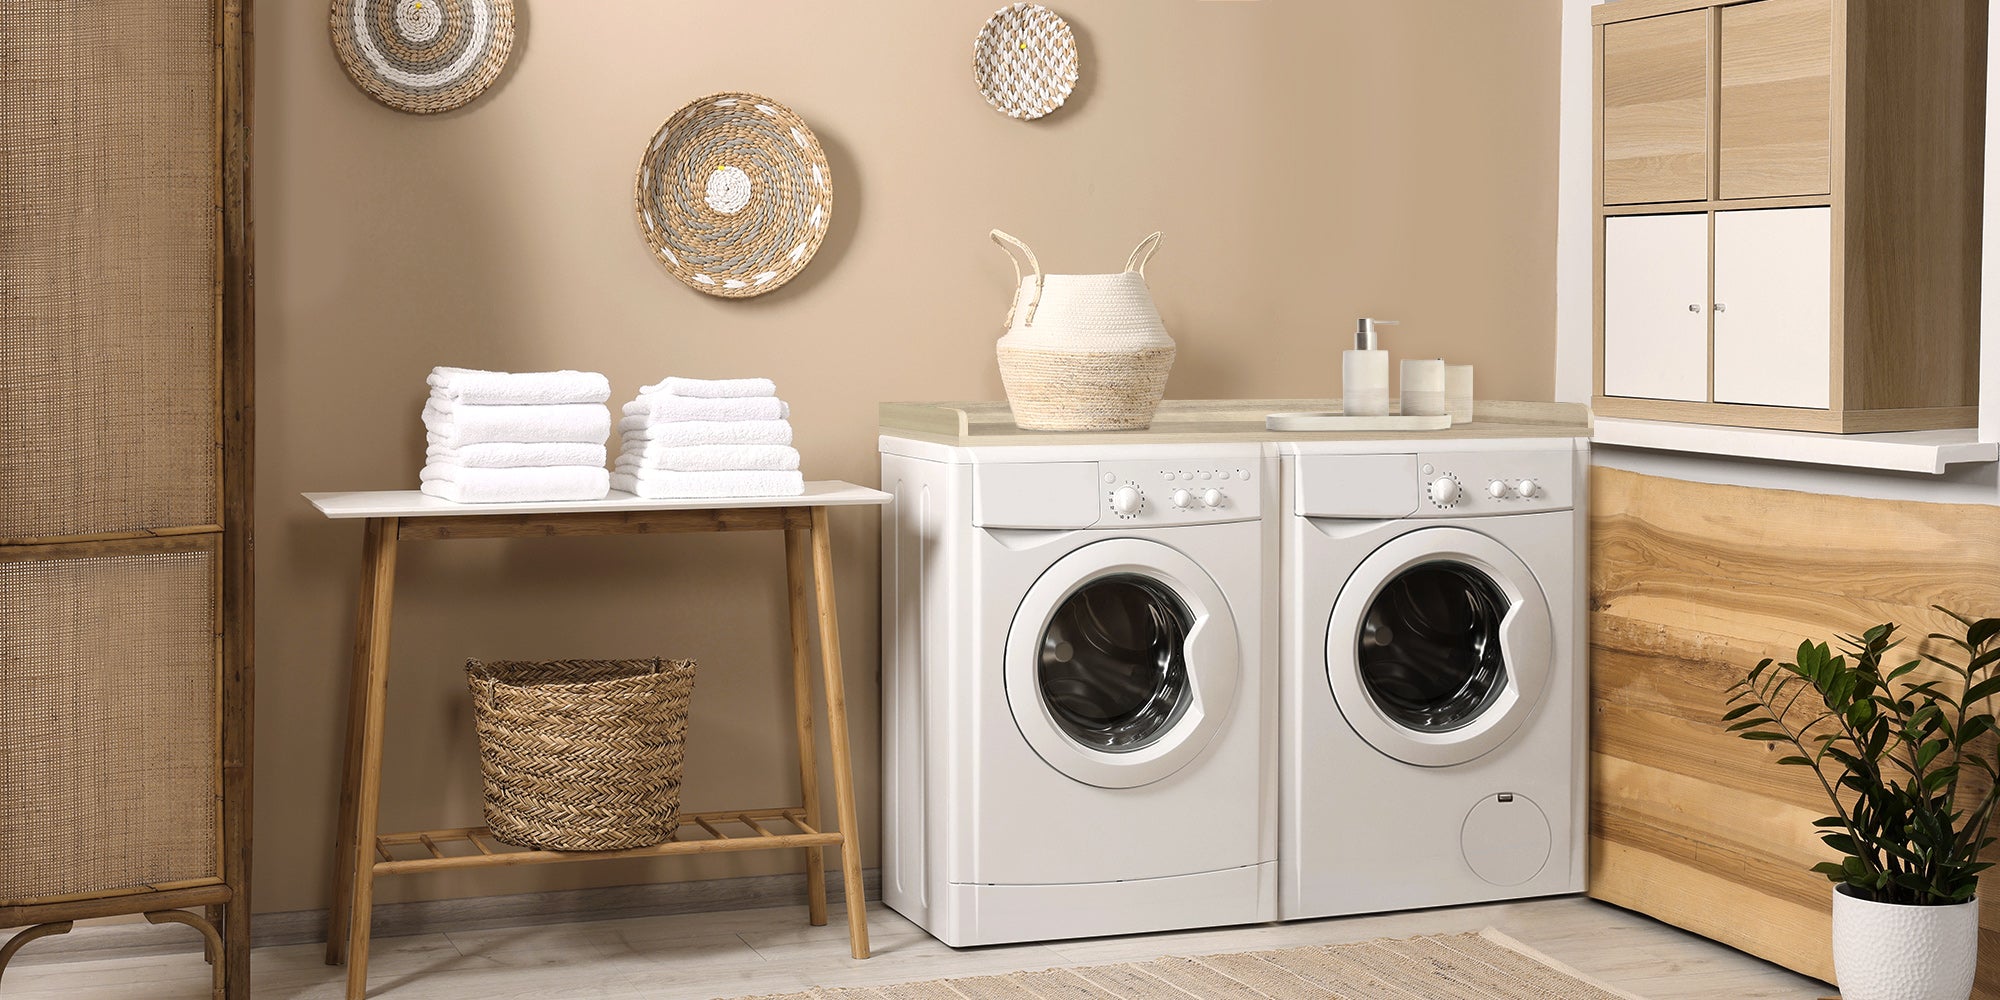 Introducing New Colors for Washer and Dryer Countertops: Solid White, Solid Black, and Solid Gray